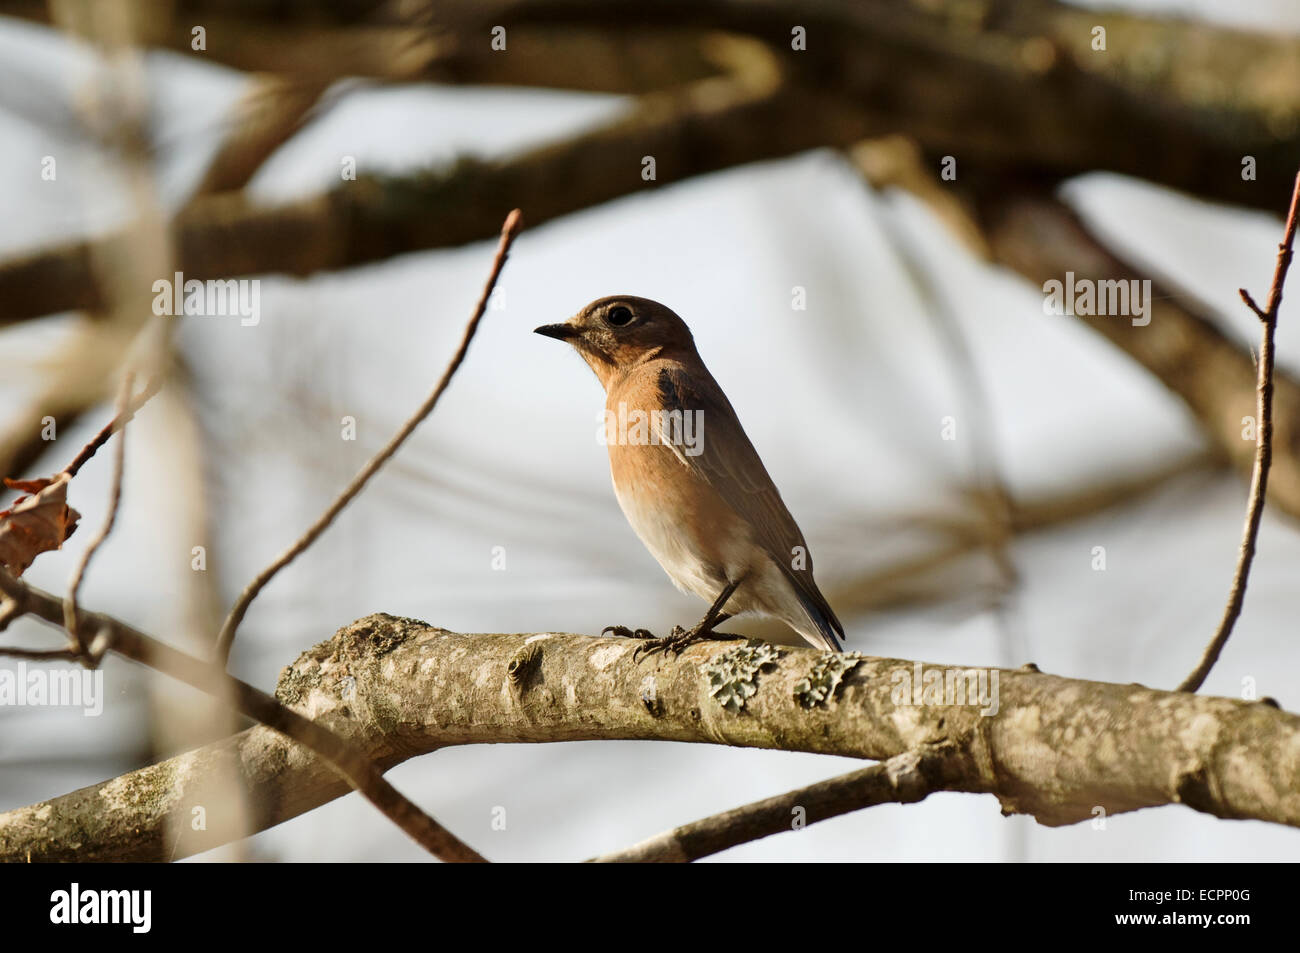 Small brown and white bird in a tree. Stock Photo